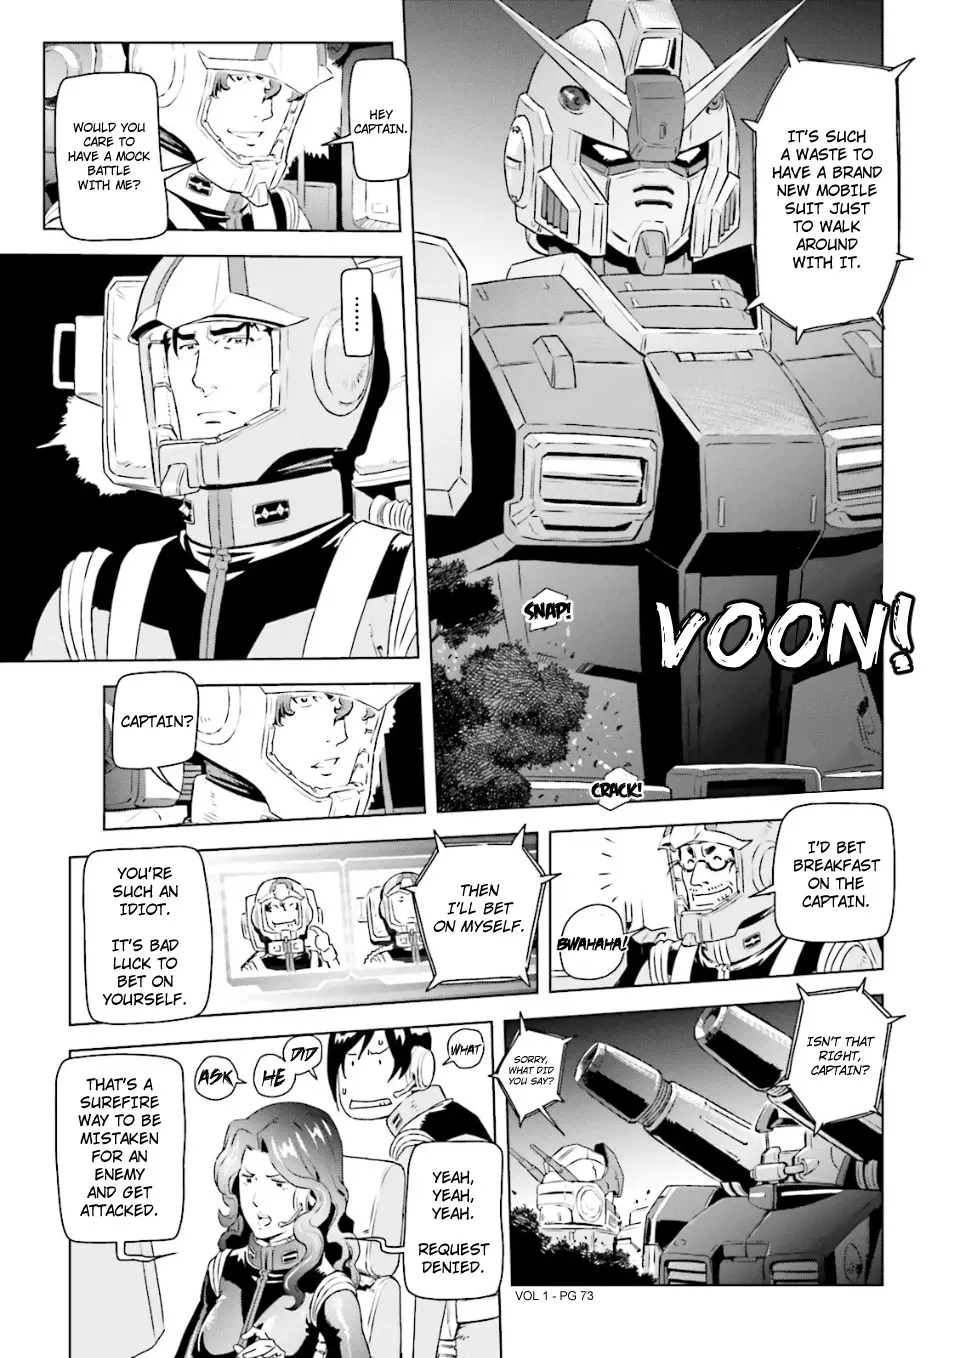 Mobile Suit Gundam Side Story - Missing Link - 3 page 7-7a3d7fcd